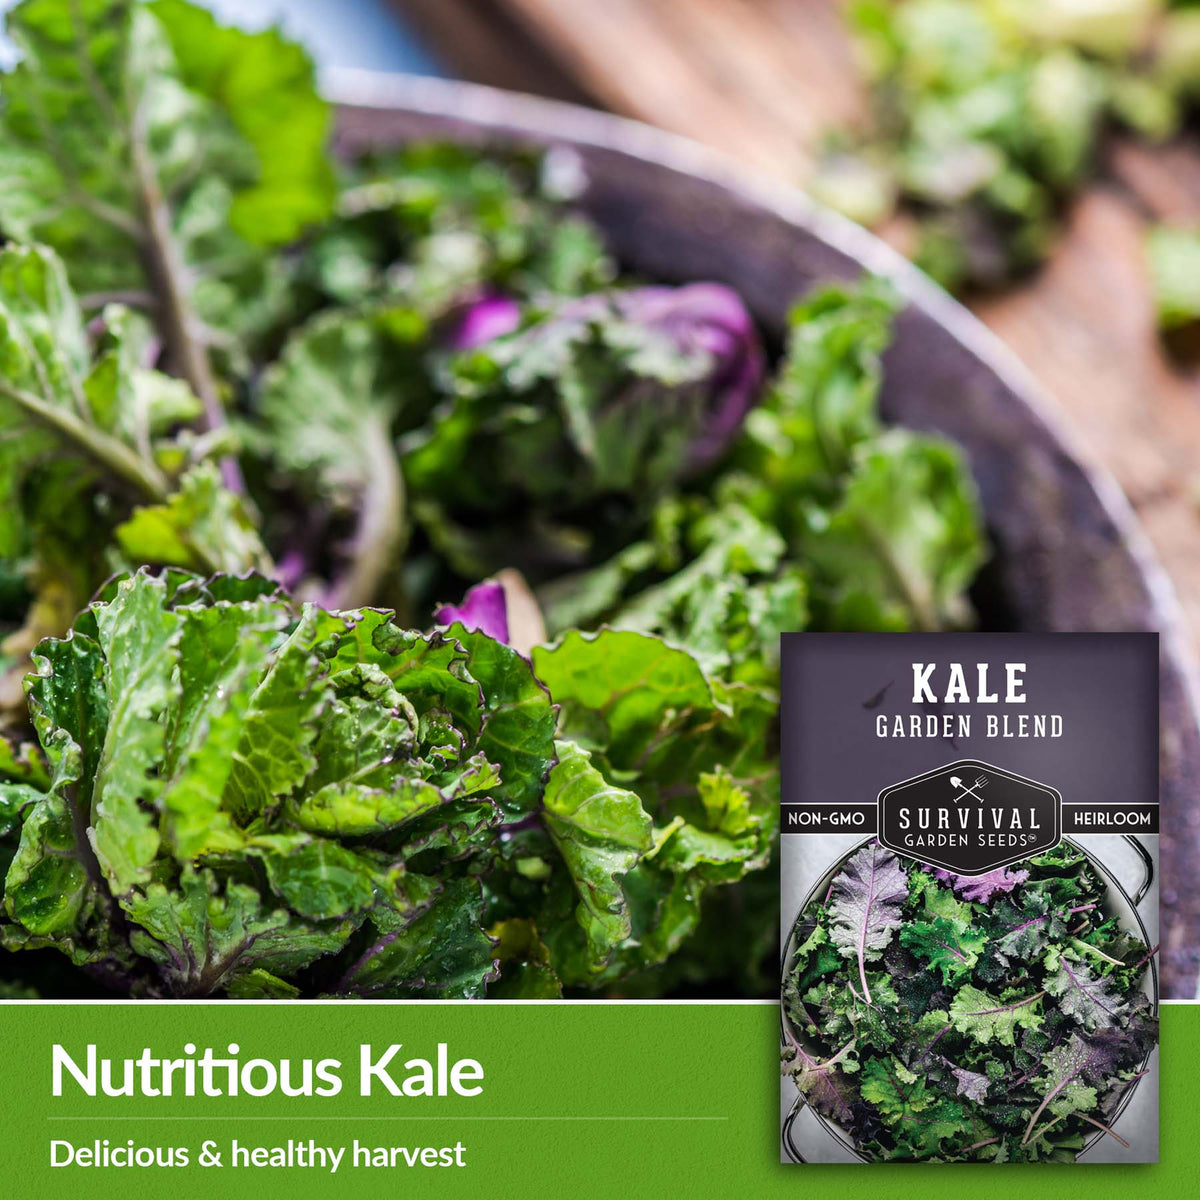 Garden Blend Kale is nutritious and delicious